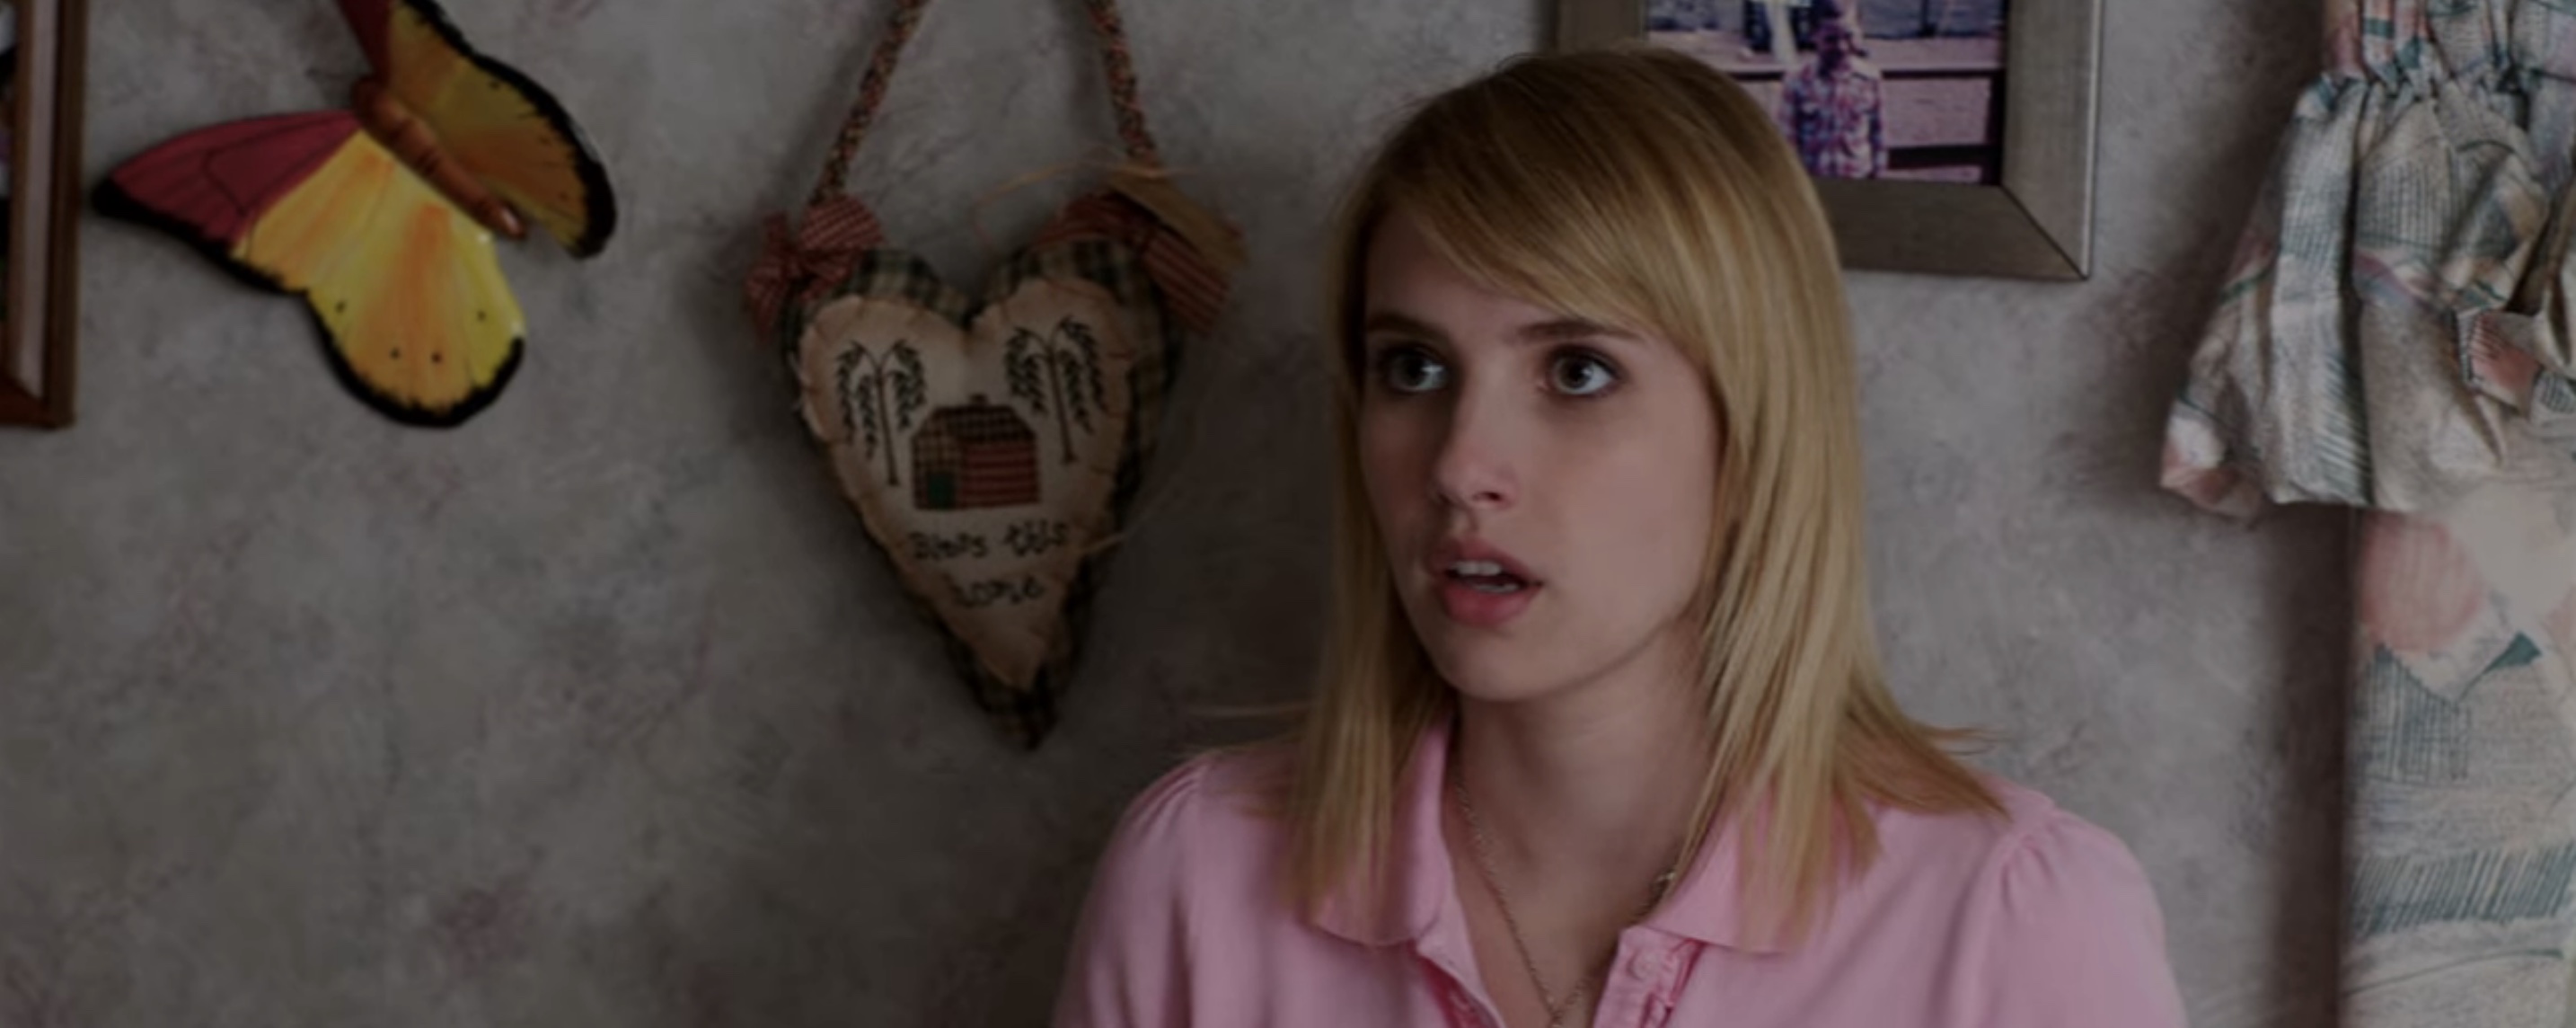 We're the Millers Cast on Netflix - Emma Roberts as Casey Mathis